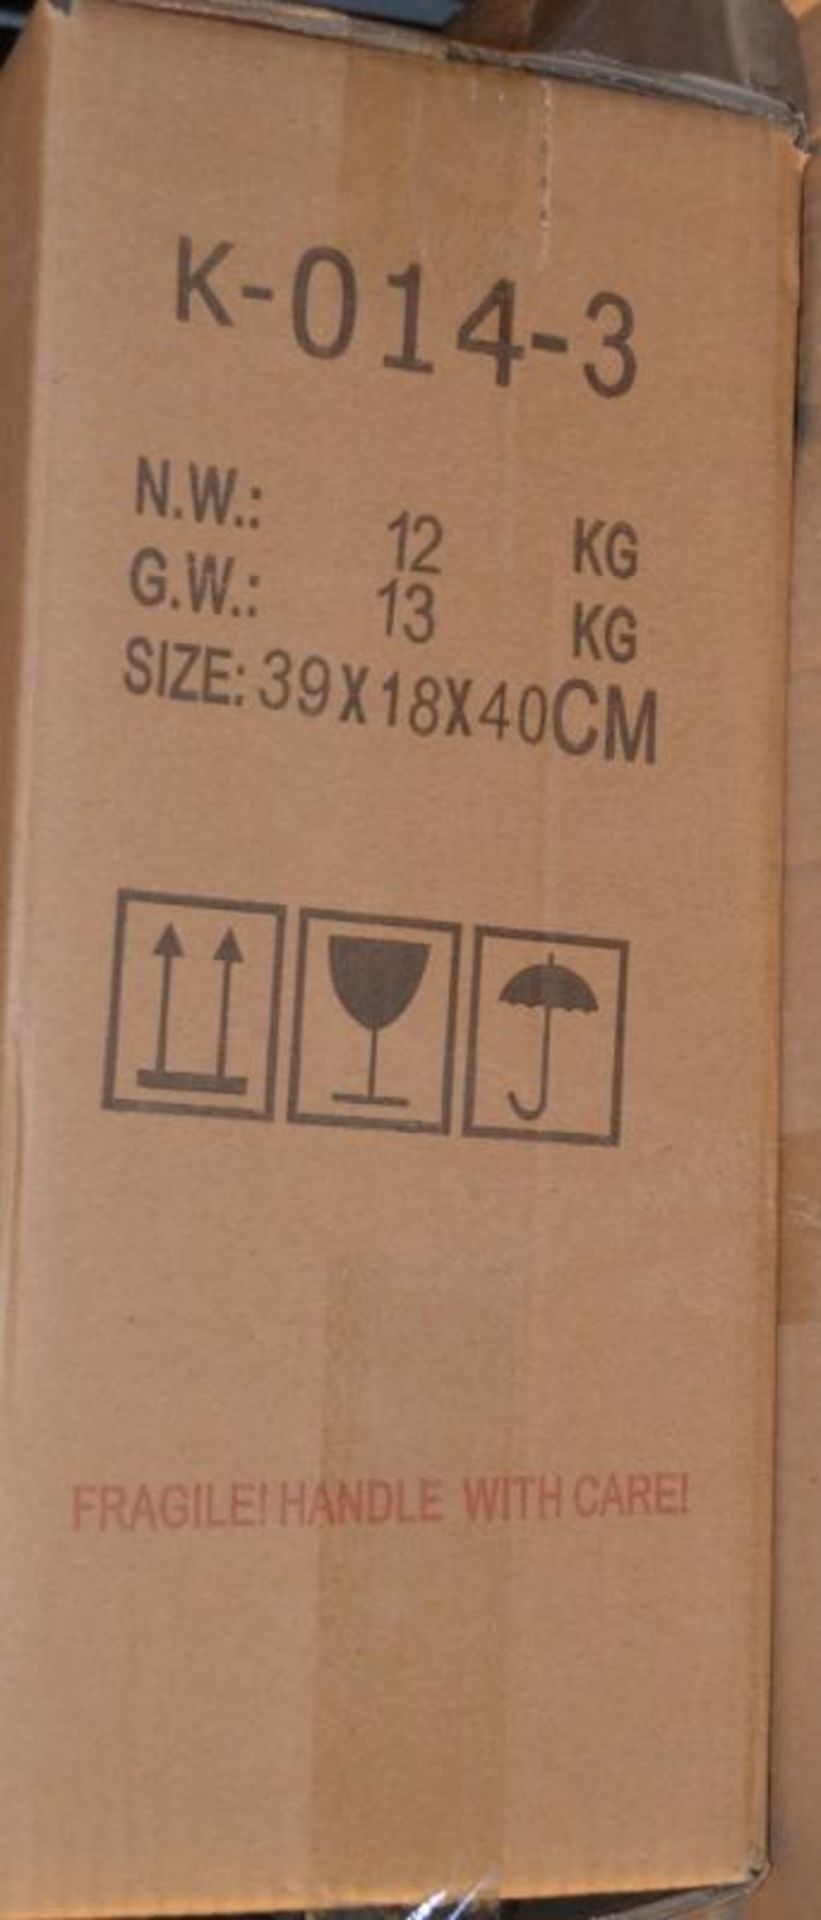 1 x Close Coupled Toilet Pan With Soft Close Toilet Seat And Cistern (Inc. Fittings) - Brand New Box - Image 8 of 10